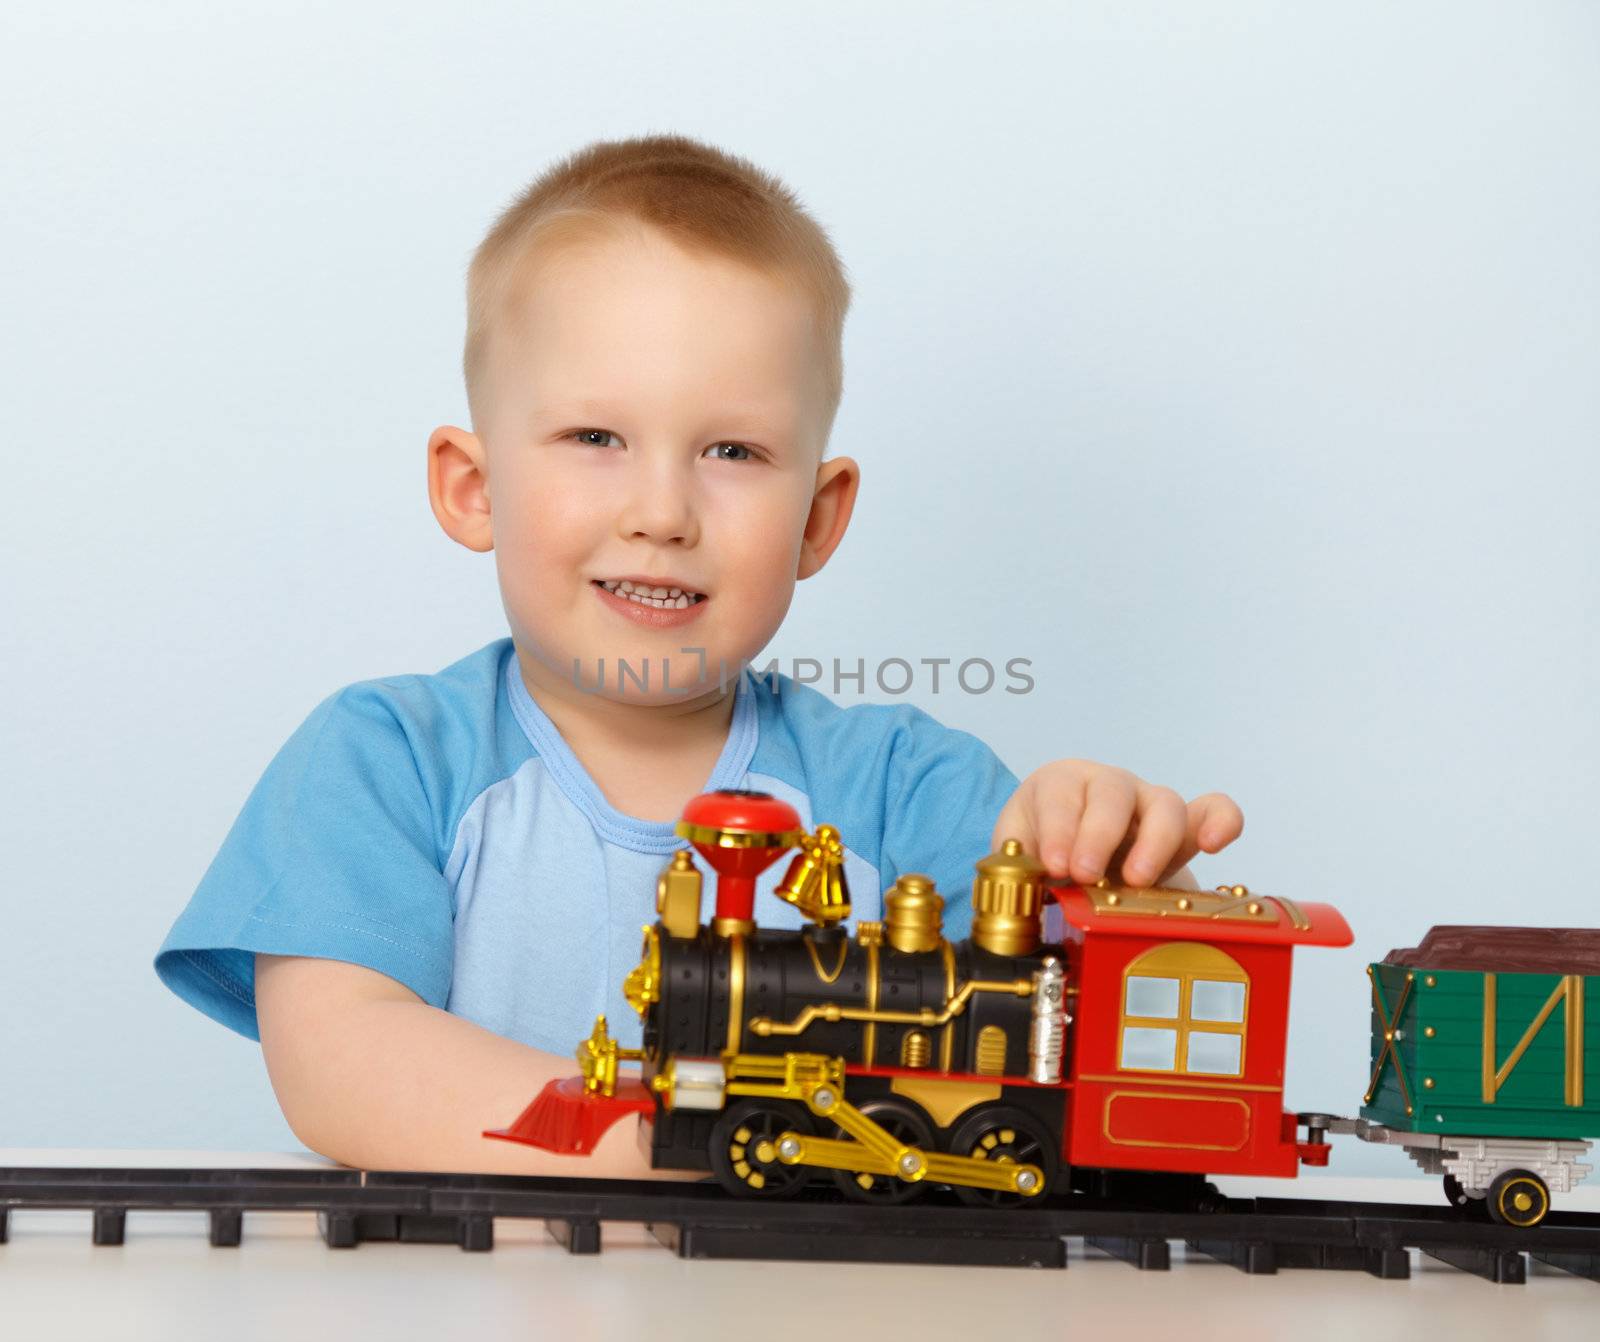 Little boy playing with a toy locomotive on blue background